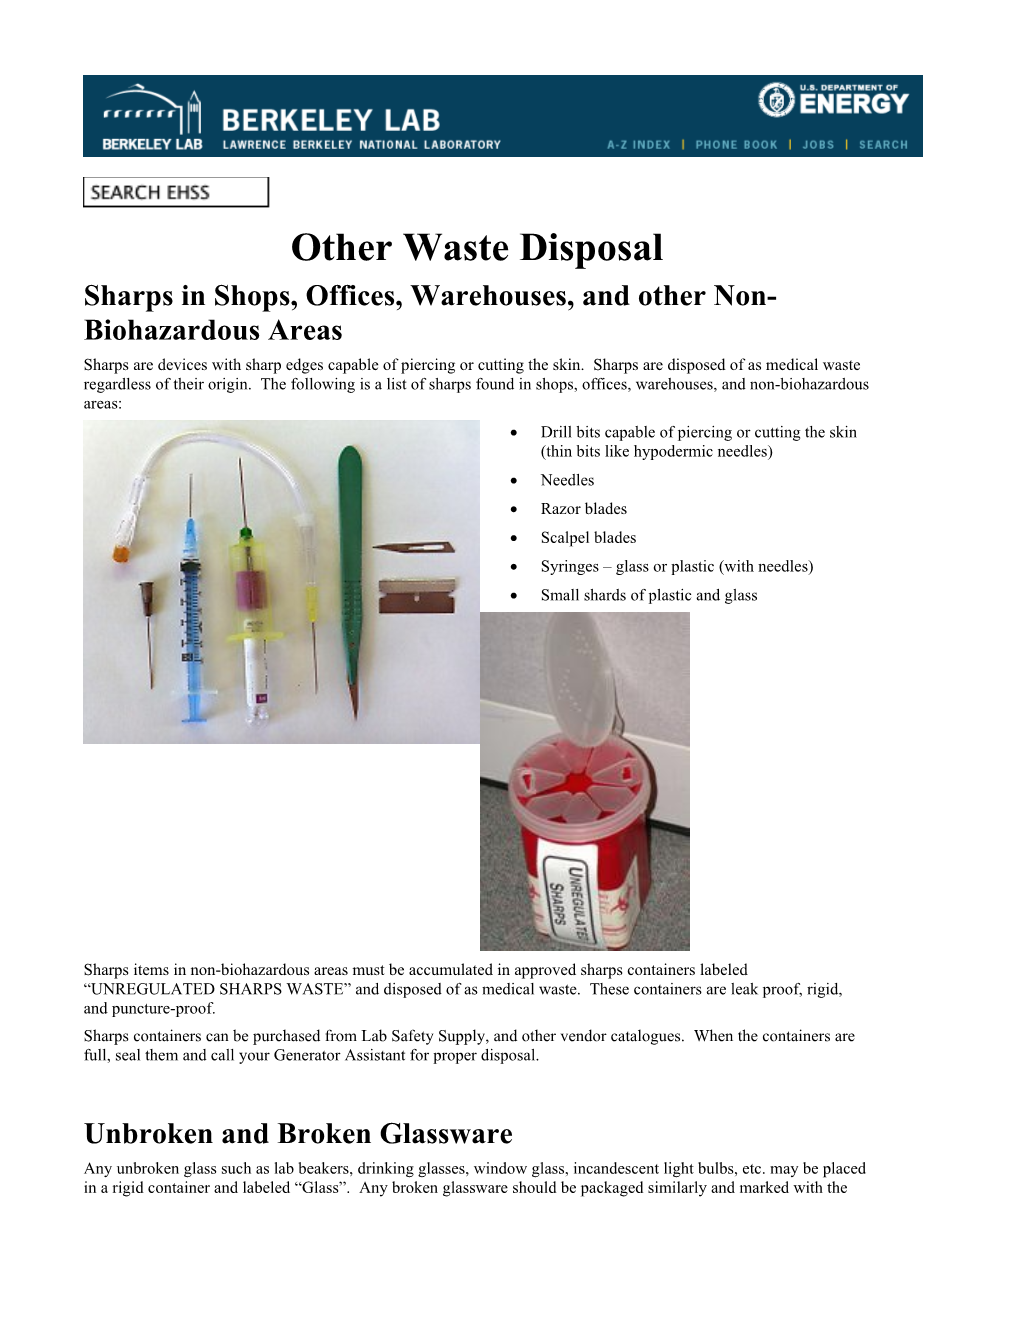 Sharps in Shops, Offices, Warehouses, and Other Non-Biohazardous Areas